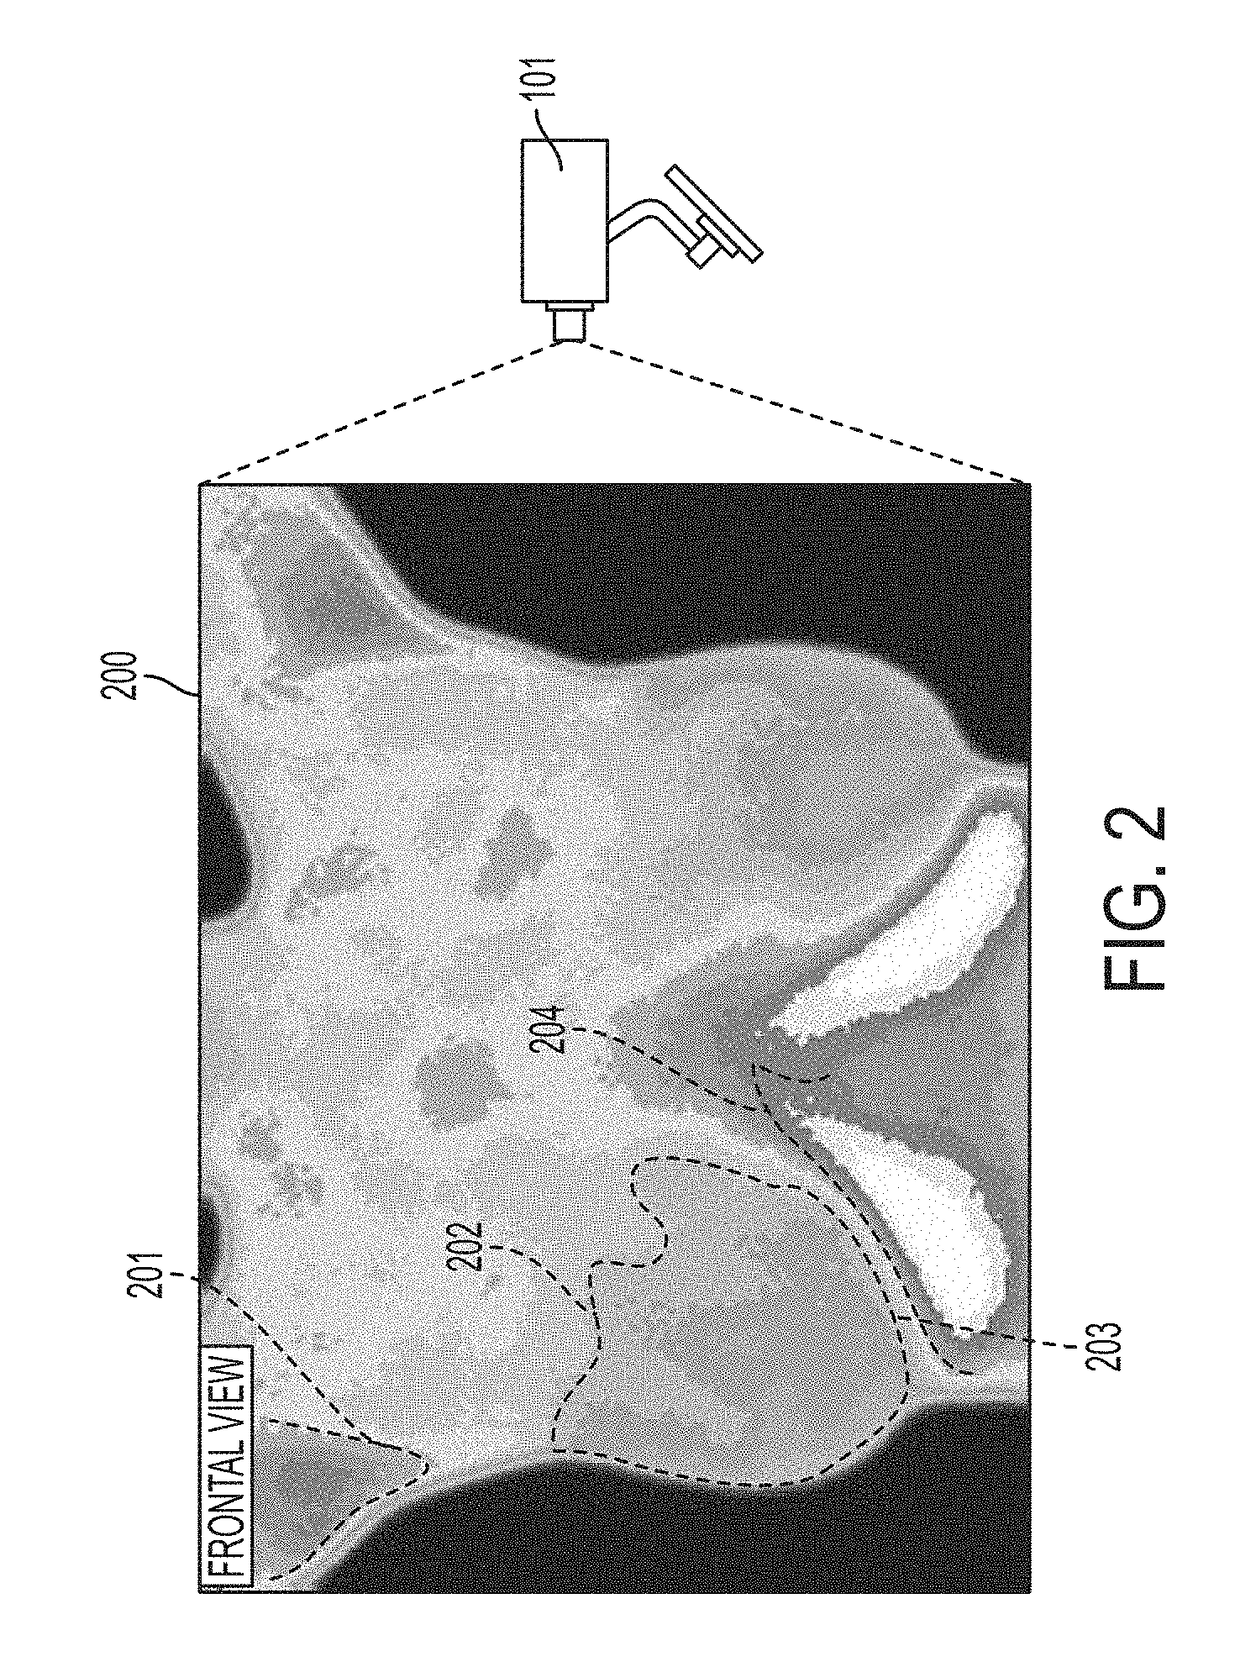 Automatic segmentation of breast tissue in a thermographic image